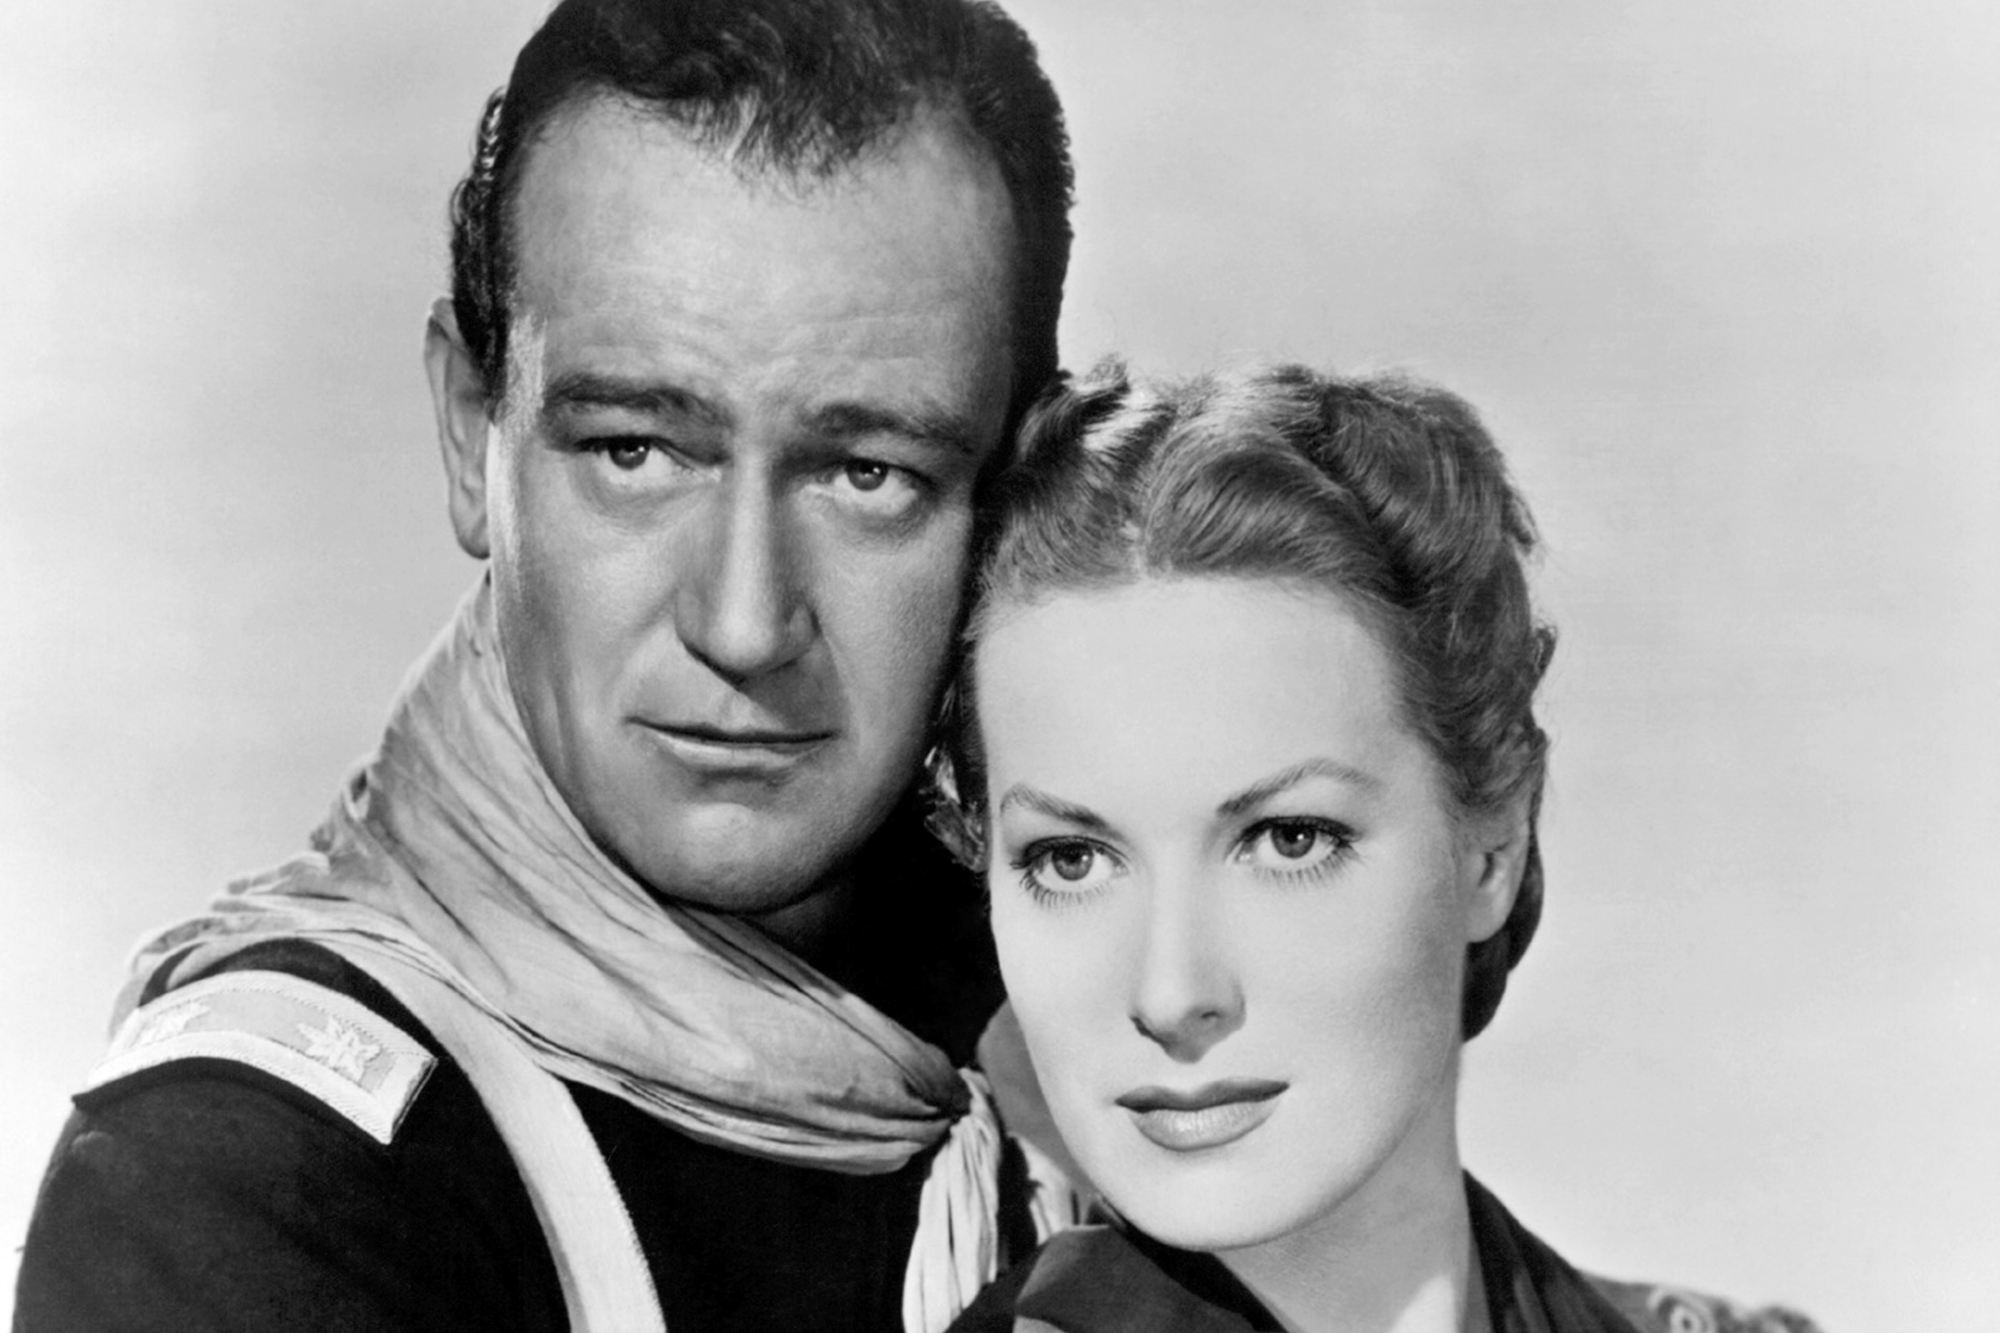 John Wayne and Maureen O'Hara in a black-and-white portrait with her head against his cheek, looking off to the side.